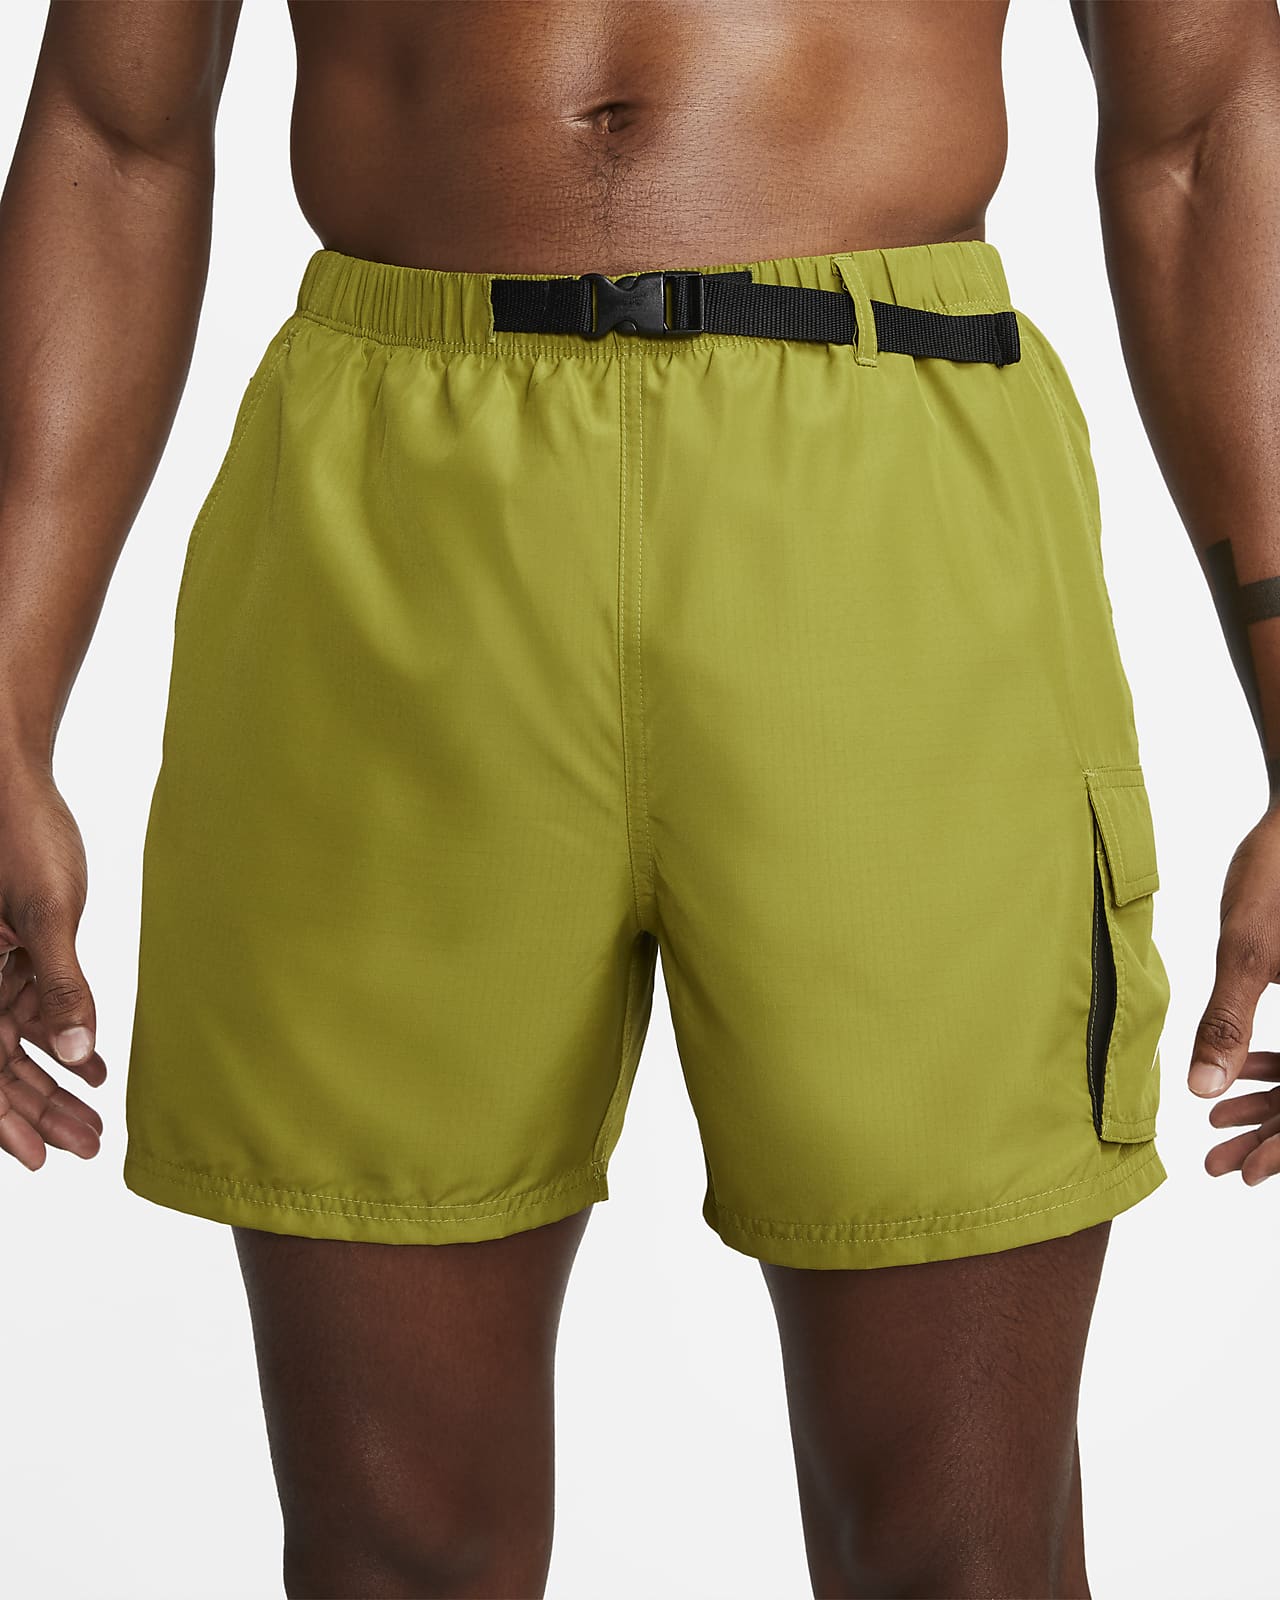 Nike Men's 13cm (approx.) Belted Packable Swimming Trunks. Nike UK